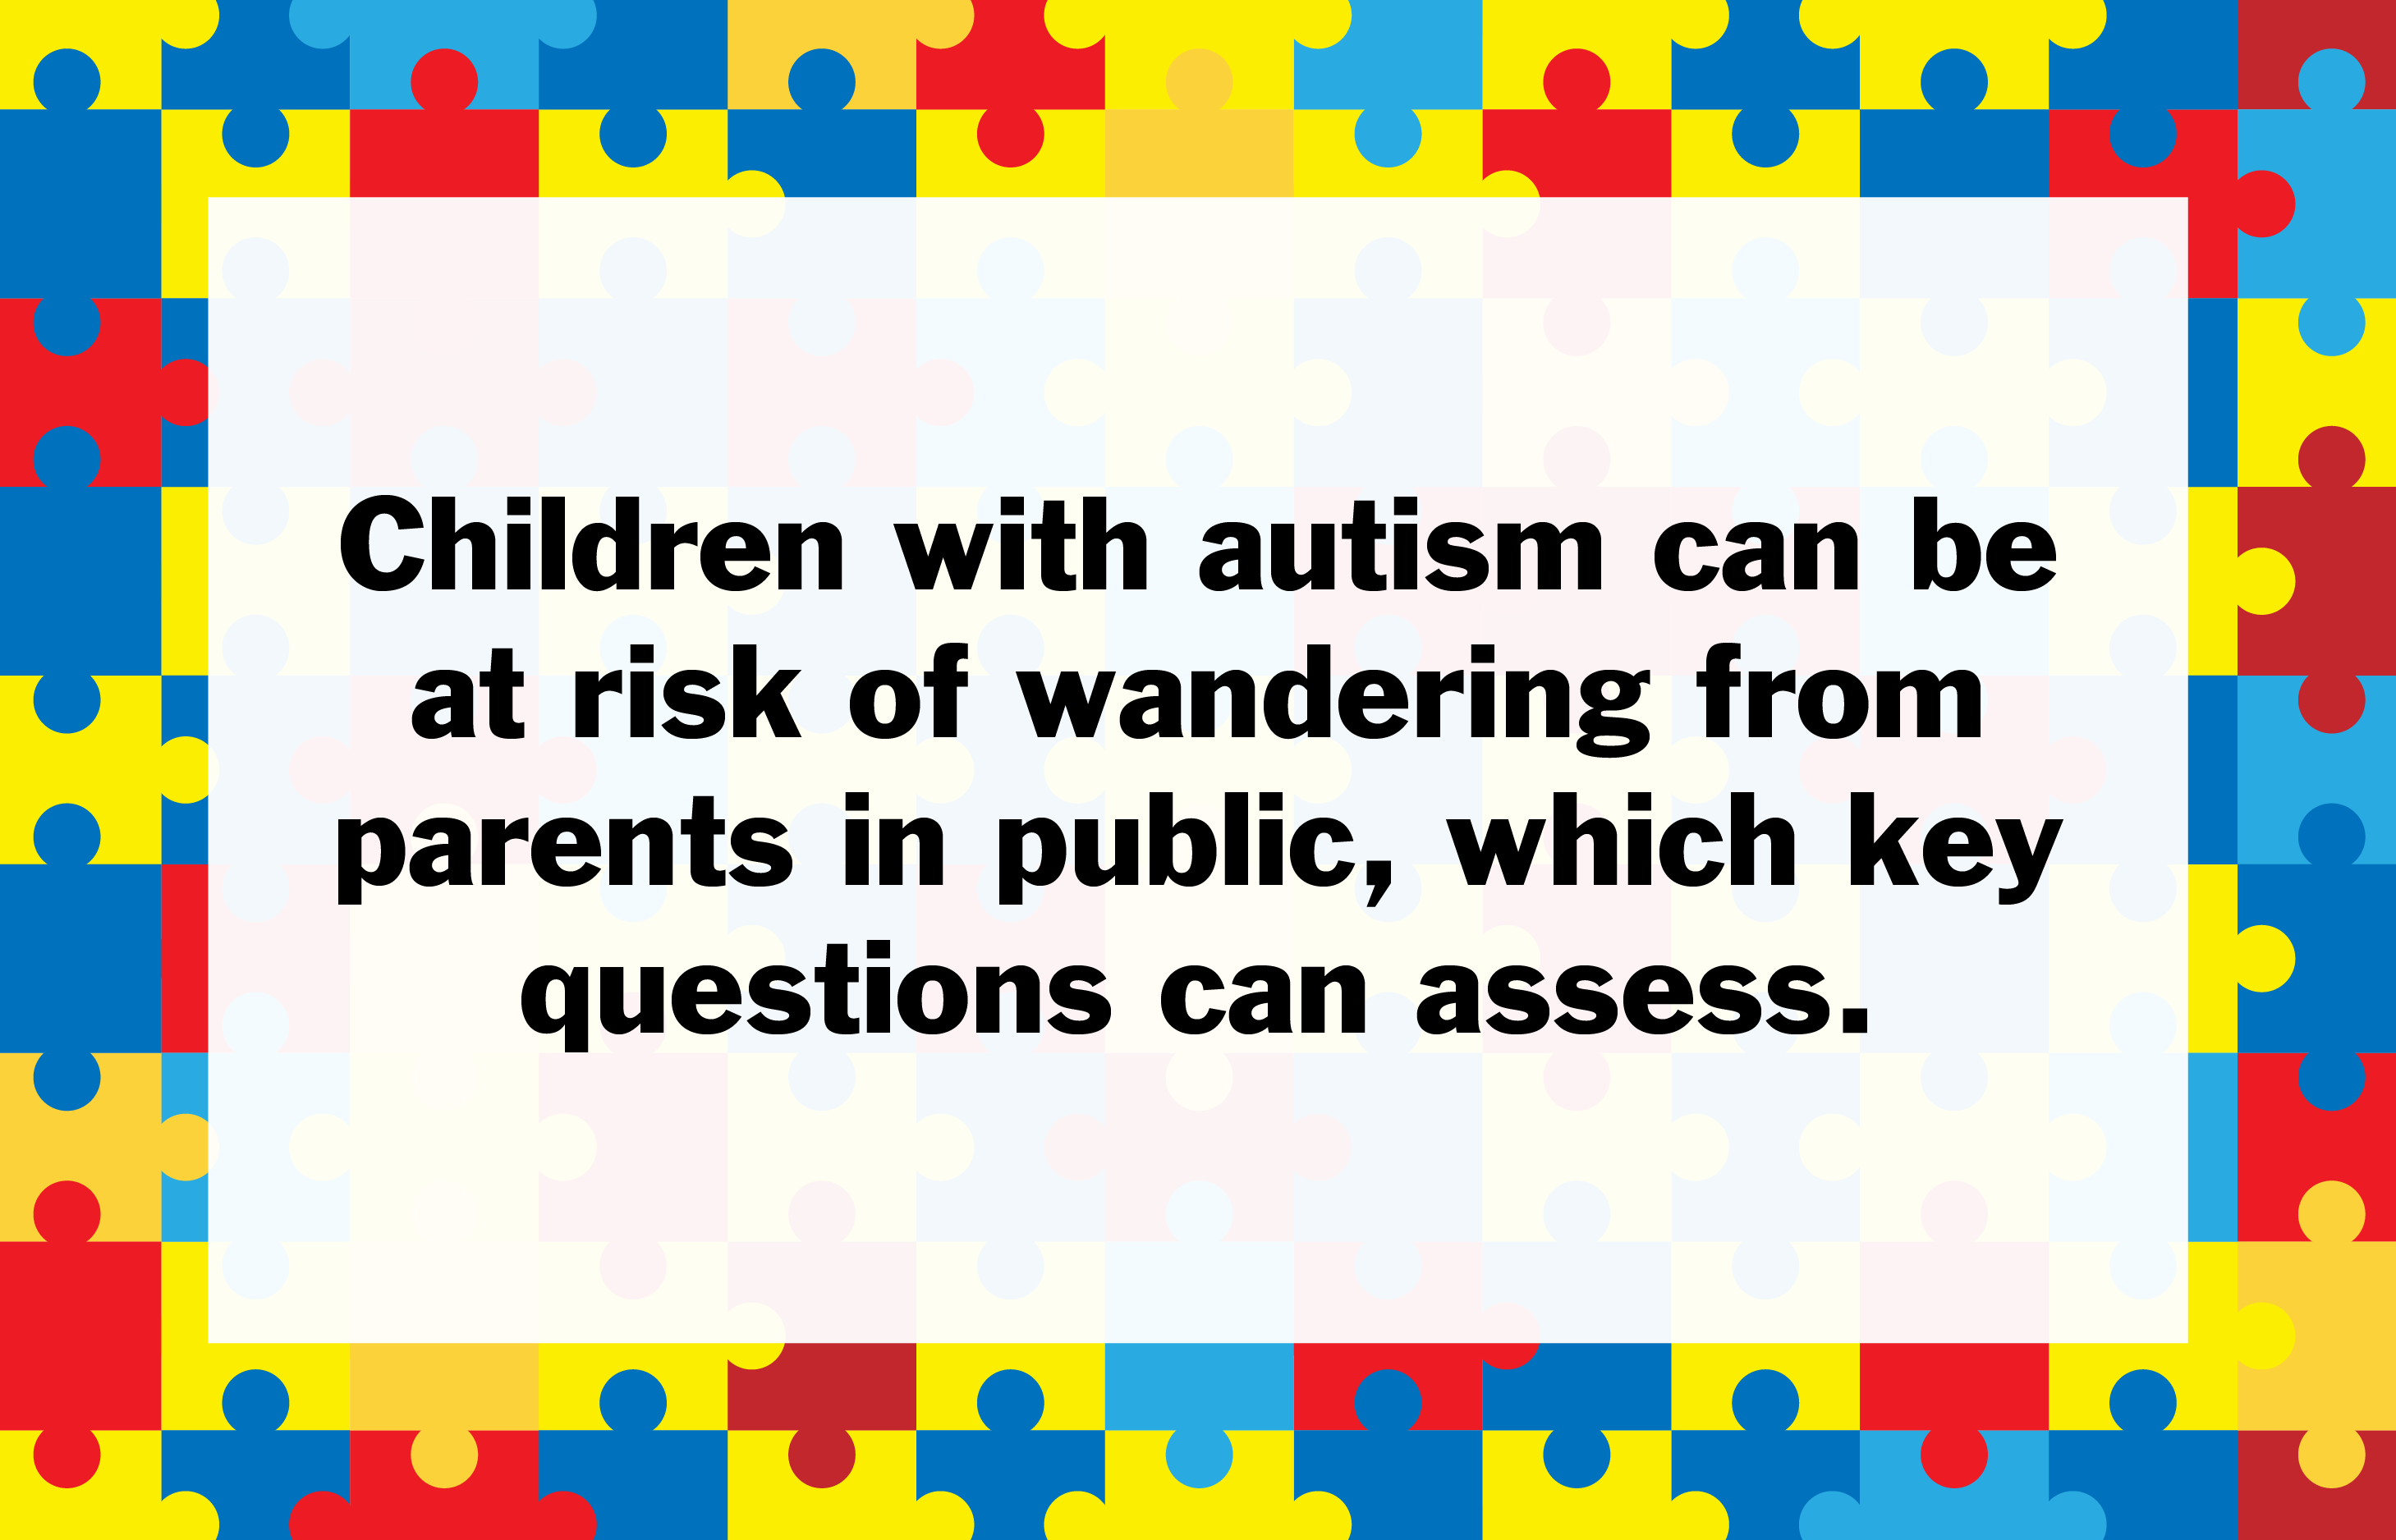 Children with autism can be at risk of wandering from parents in public